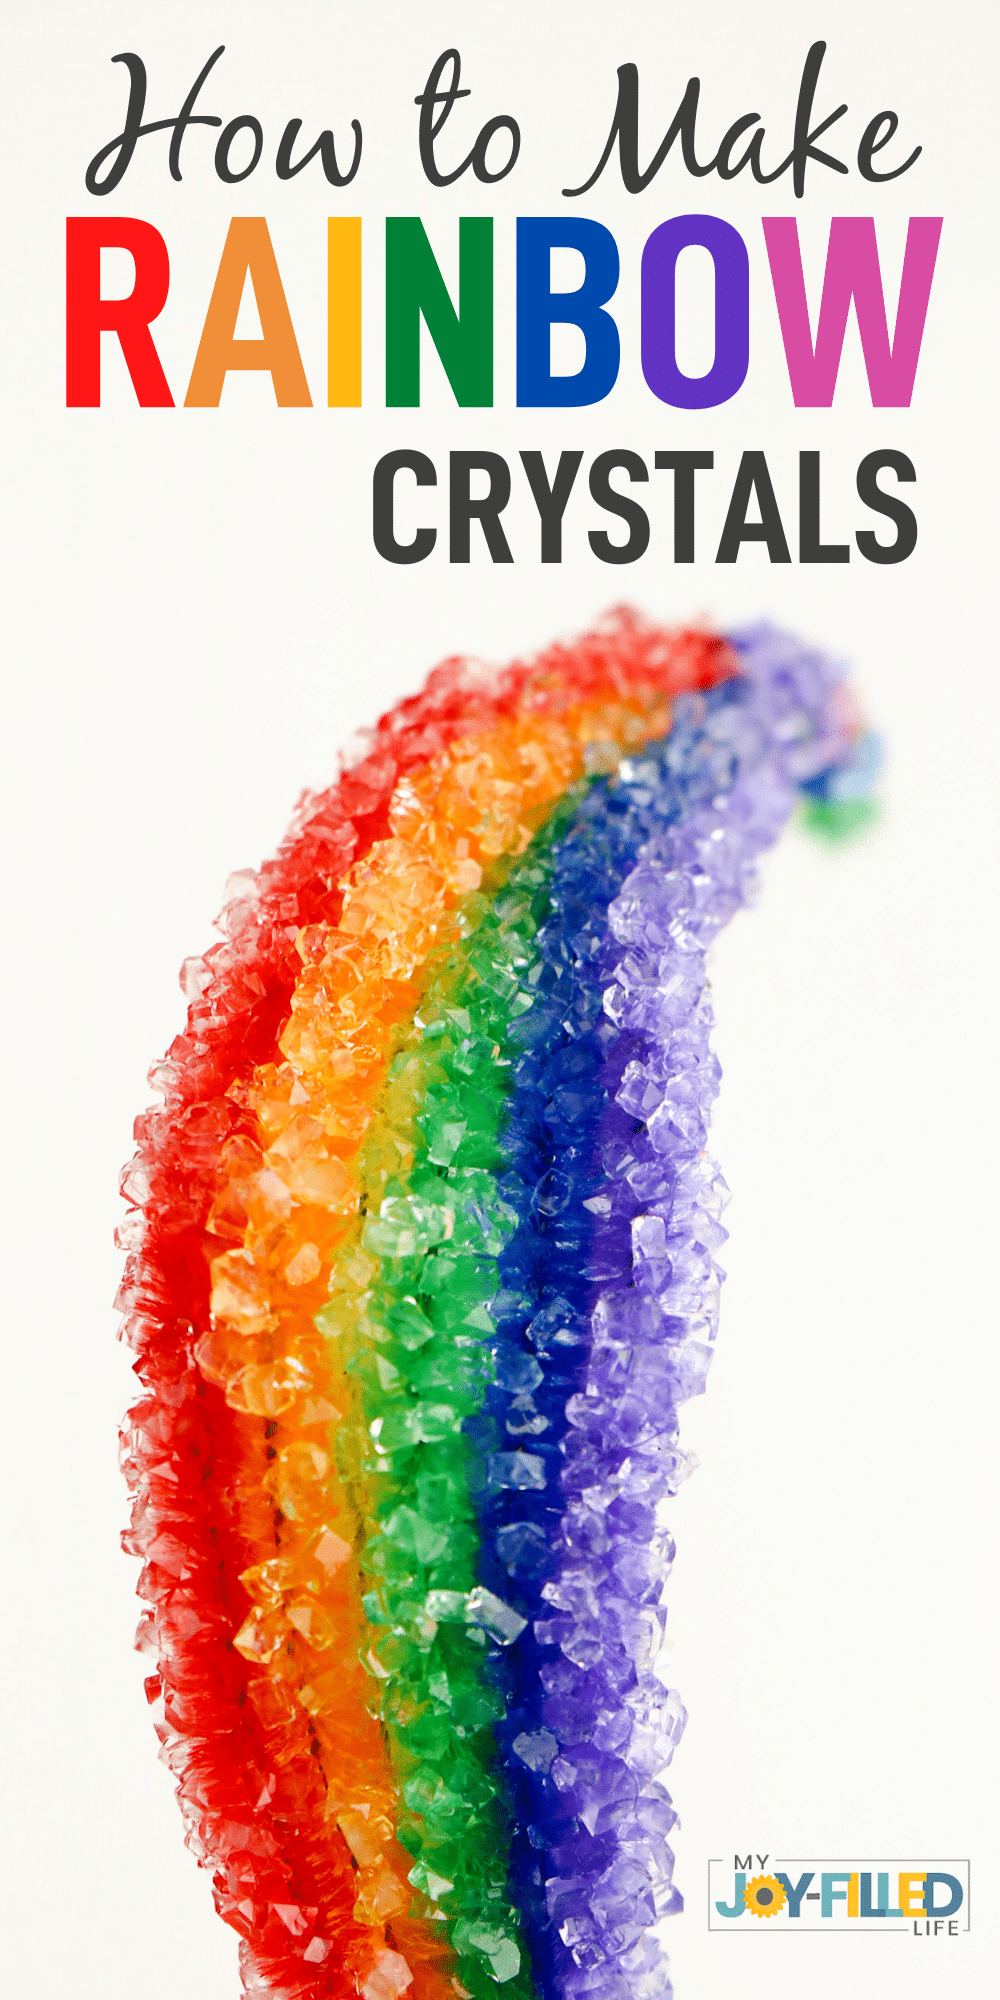 🌈 How to Grow Rainbow Crystals EASILY at Home - Kids Science Activity